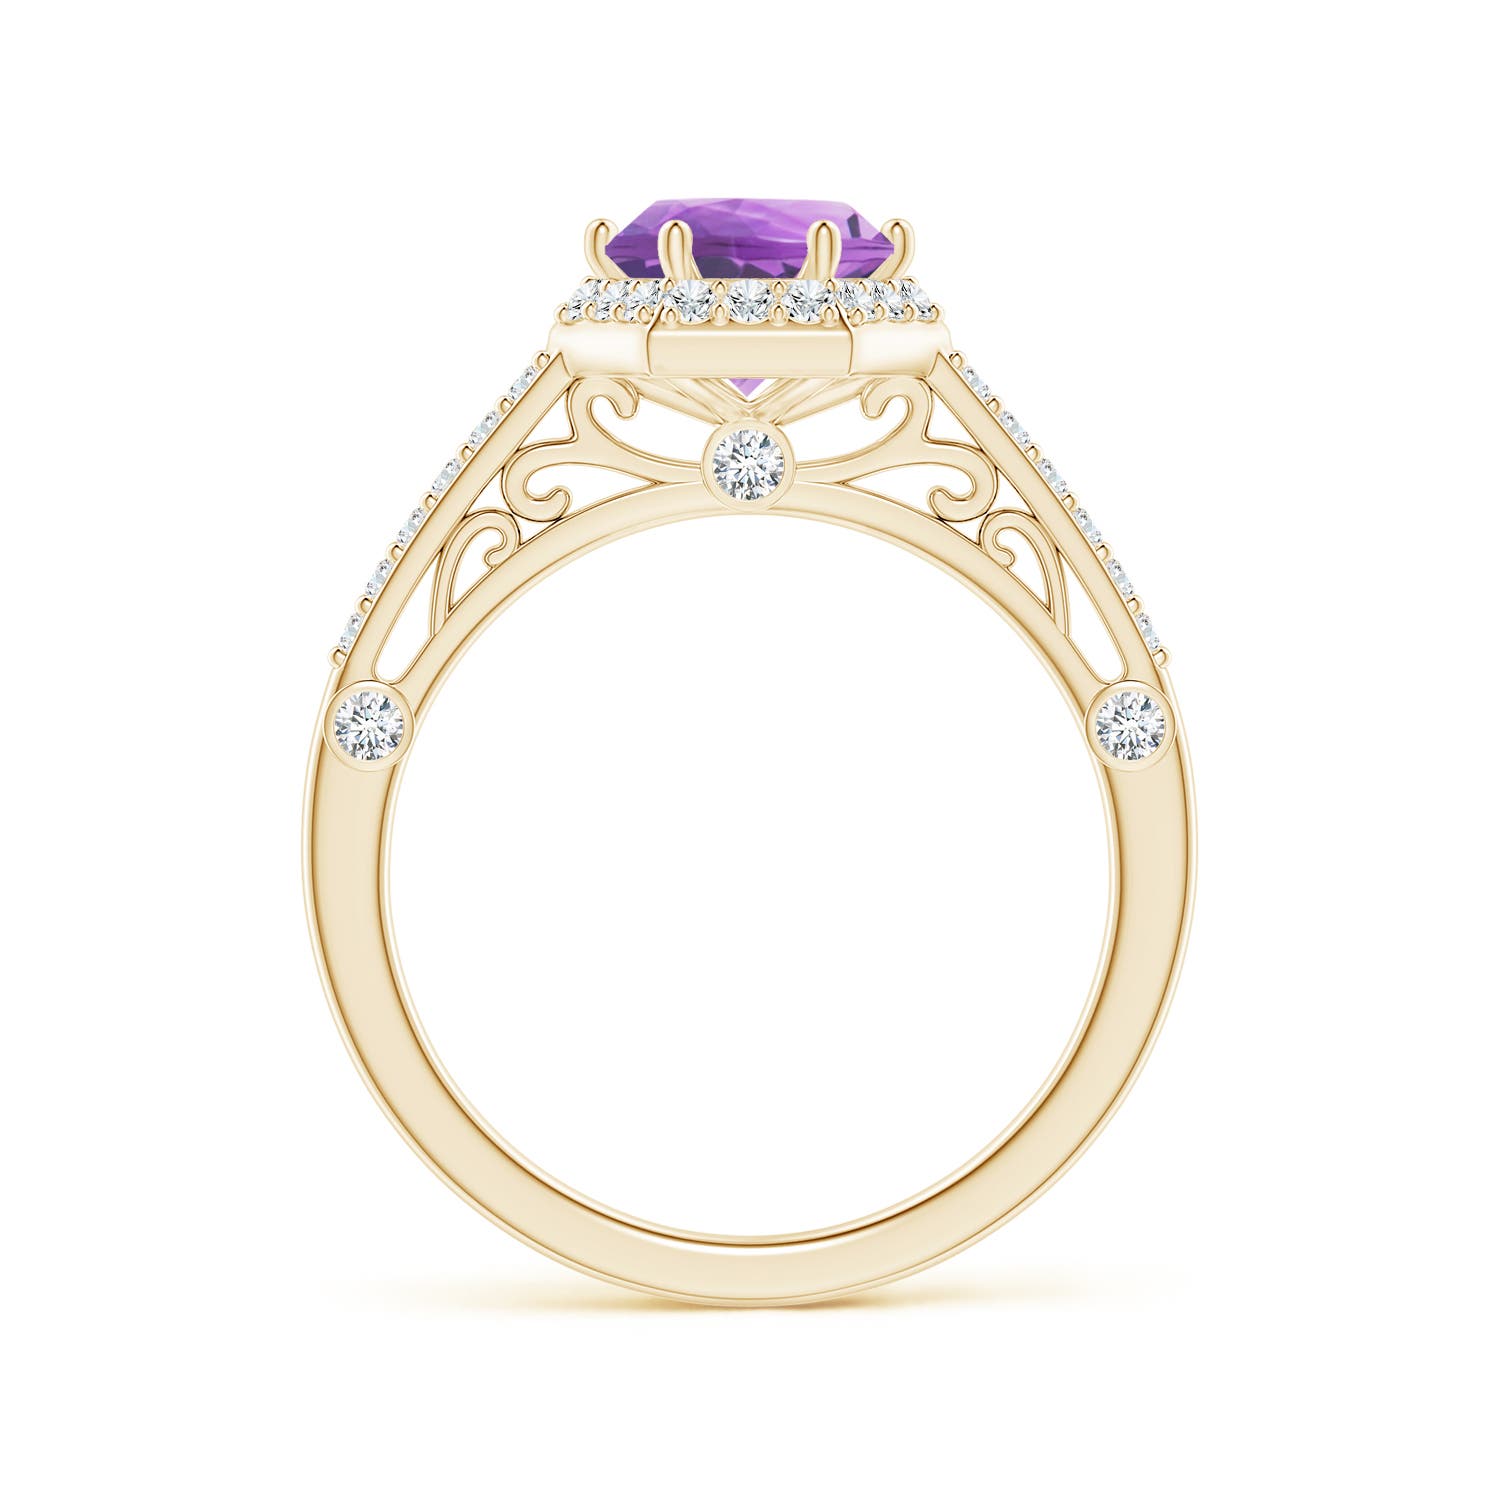 A - Amethyst / 1.52 CT / 14 KT Yellow Gold